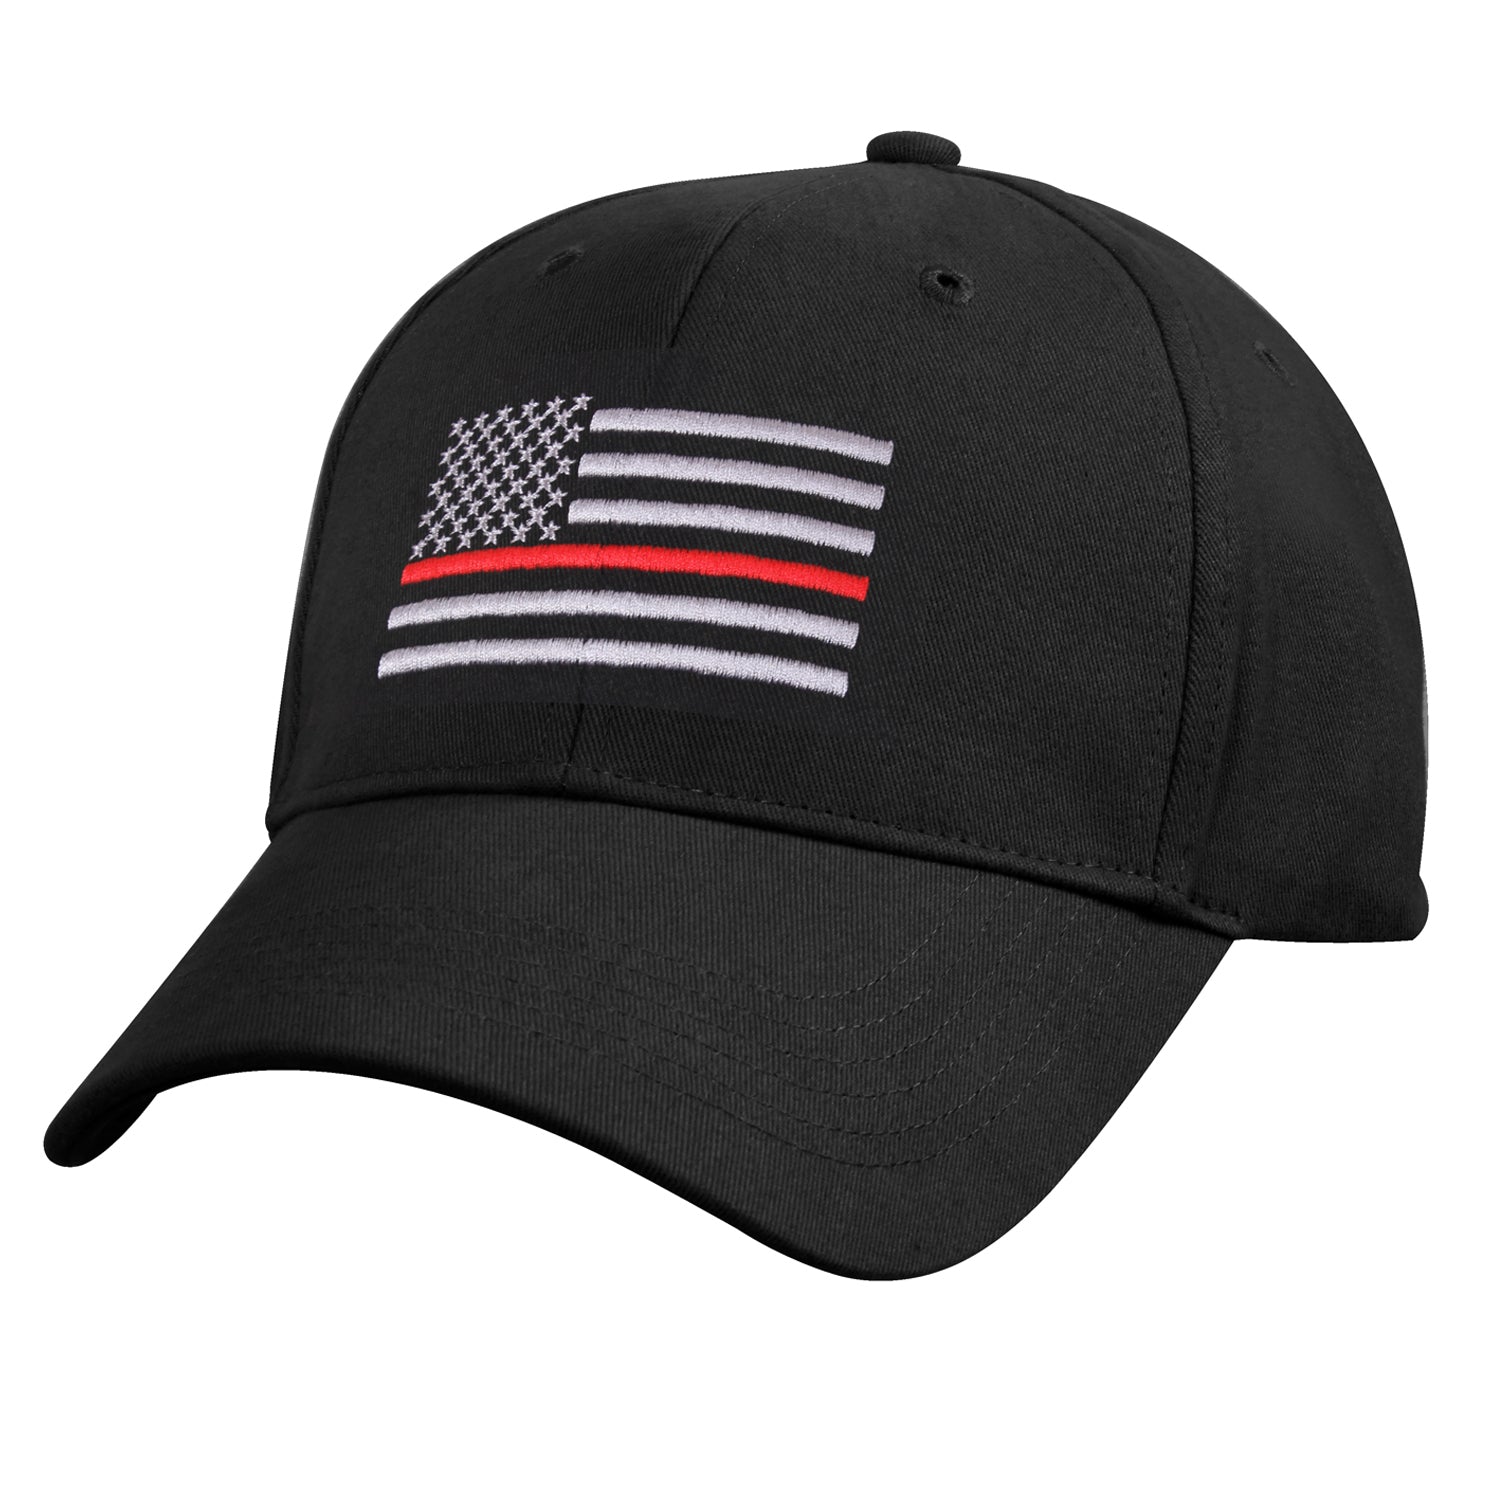 Rothco Thin Red line Low Profile Cap Black (9896)